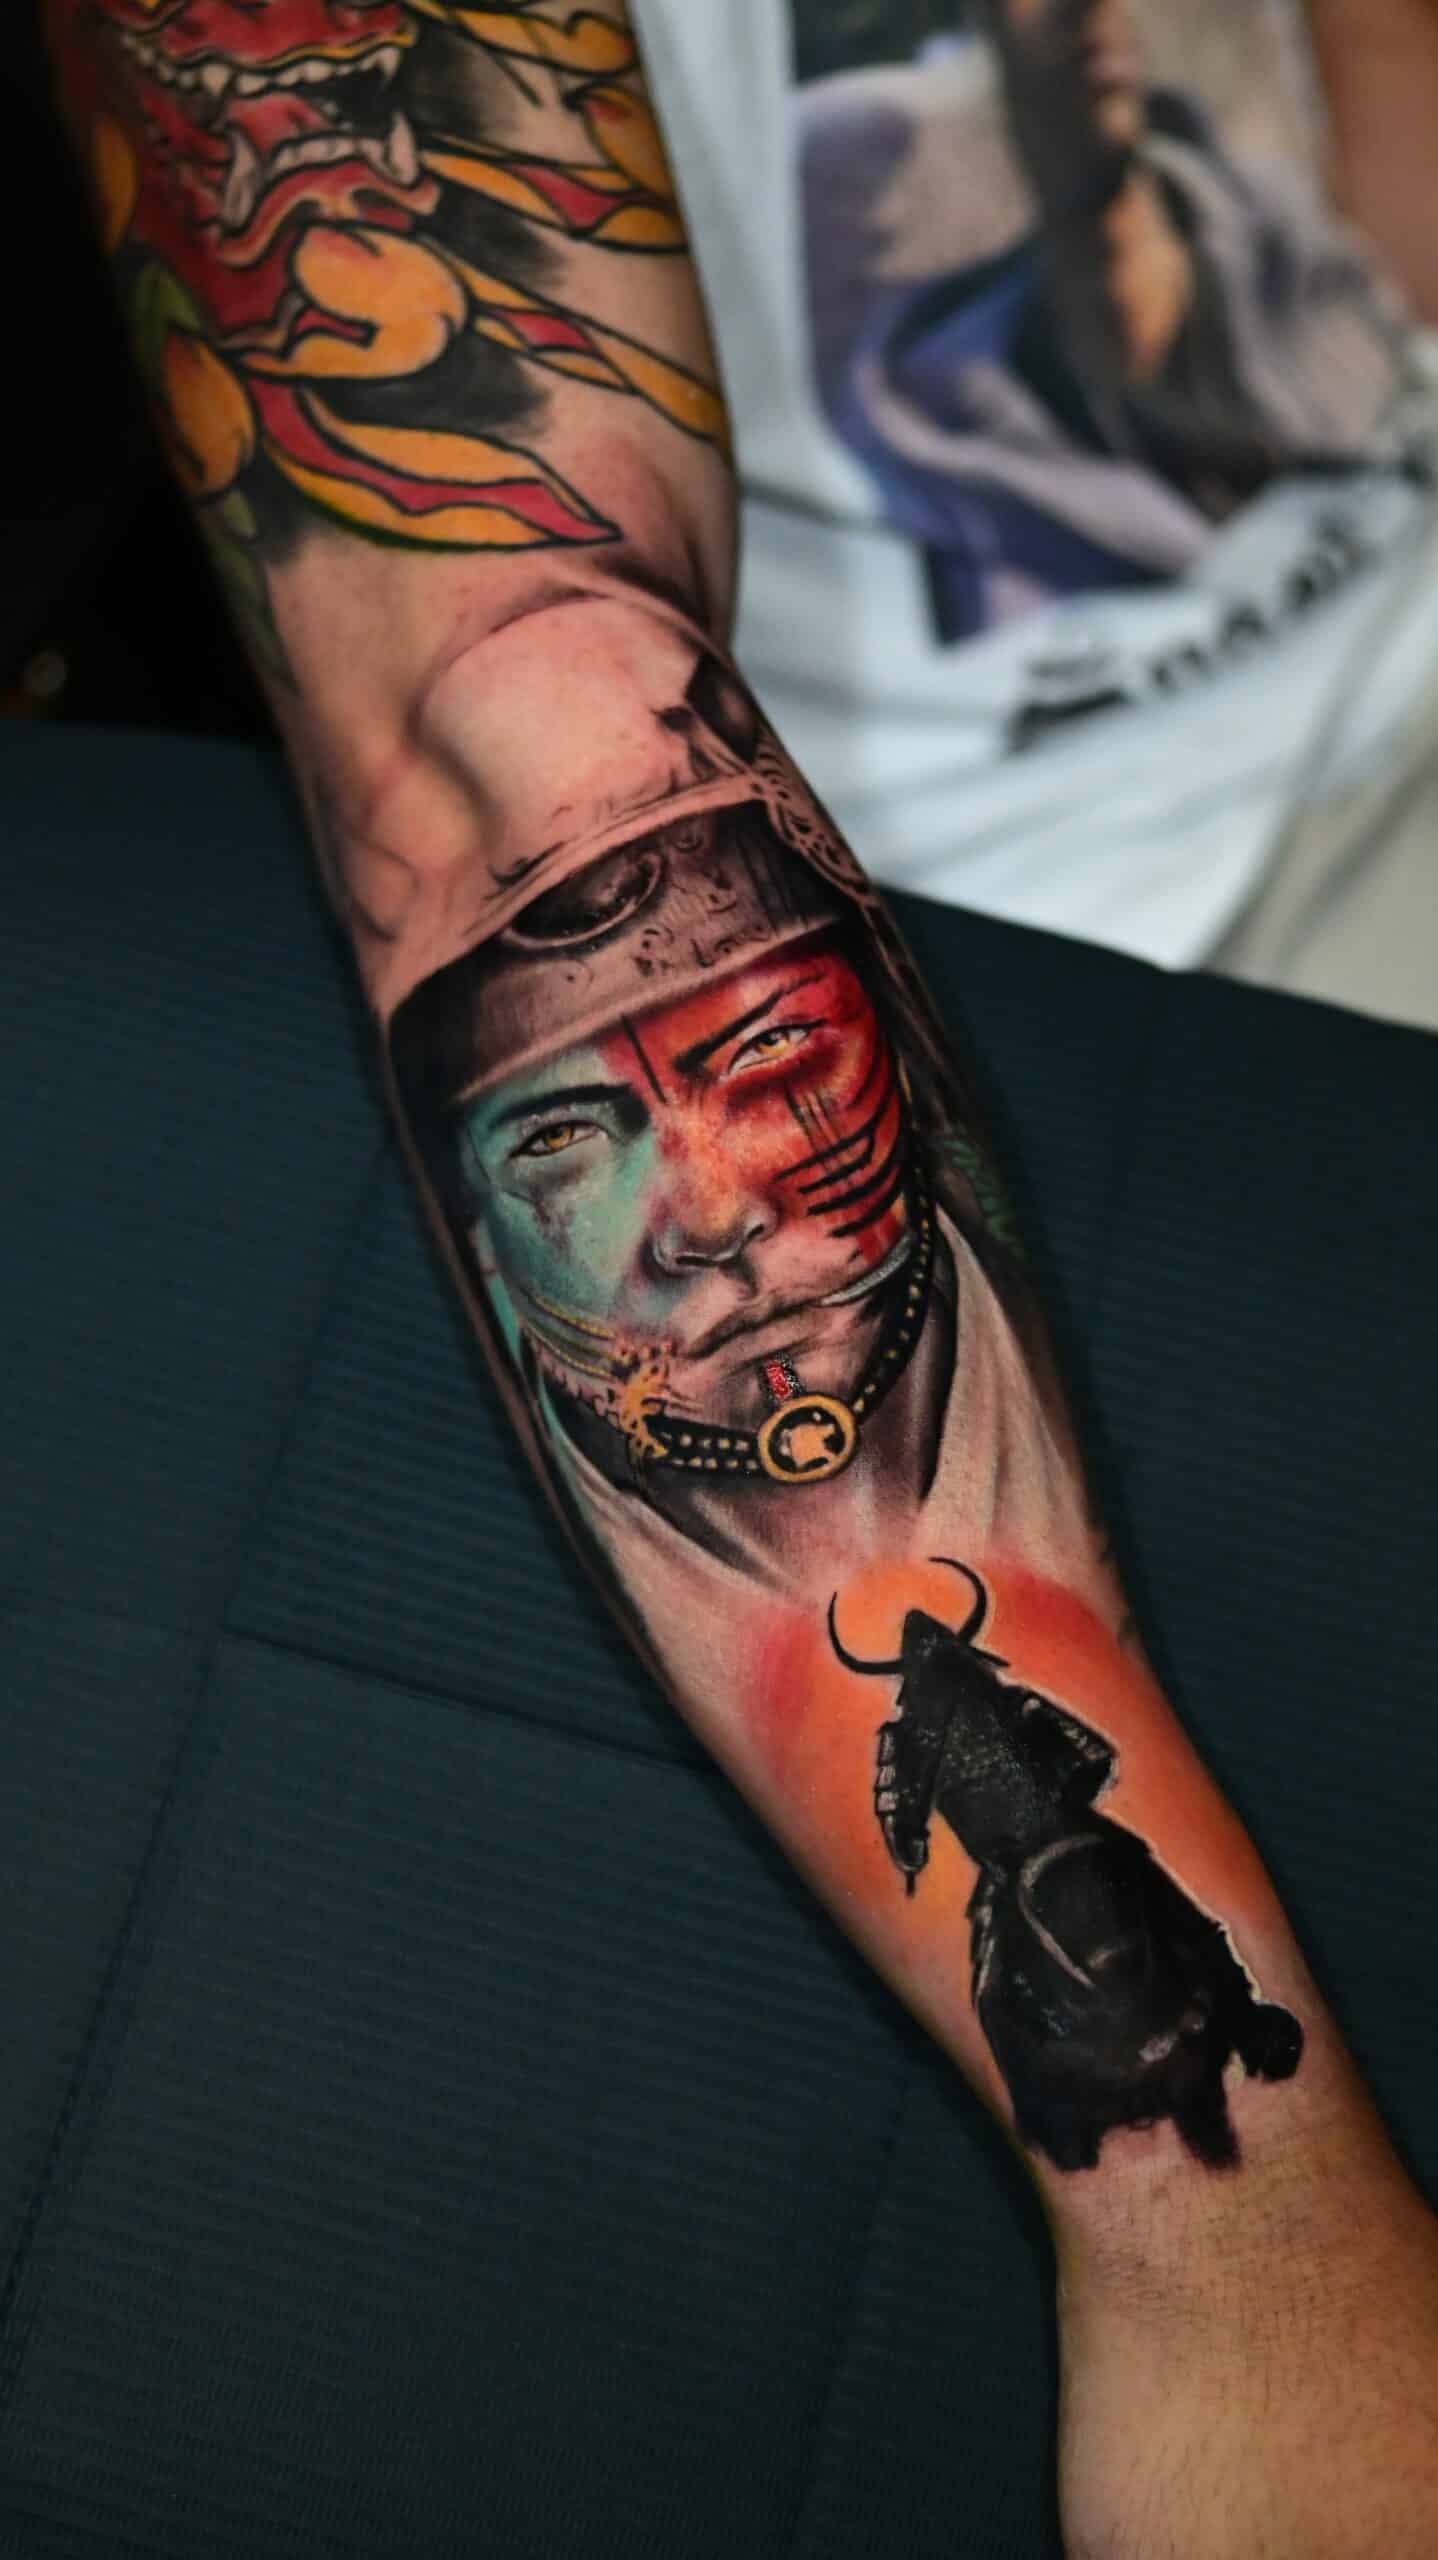 Justin “Jut” Cunnane | Memorial tattoo of a Polish Hussar warrior, for  Robert. Slovakia 🇸🇰 flag to honor the lost of his wife who was born  there. ⚔️ | Instagram